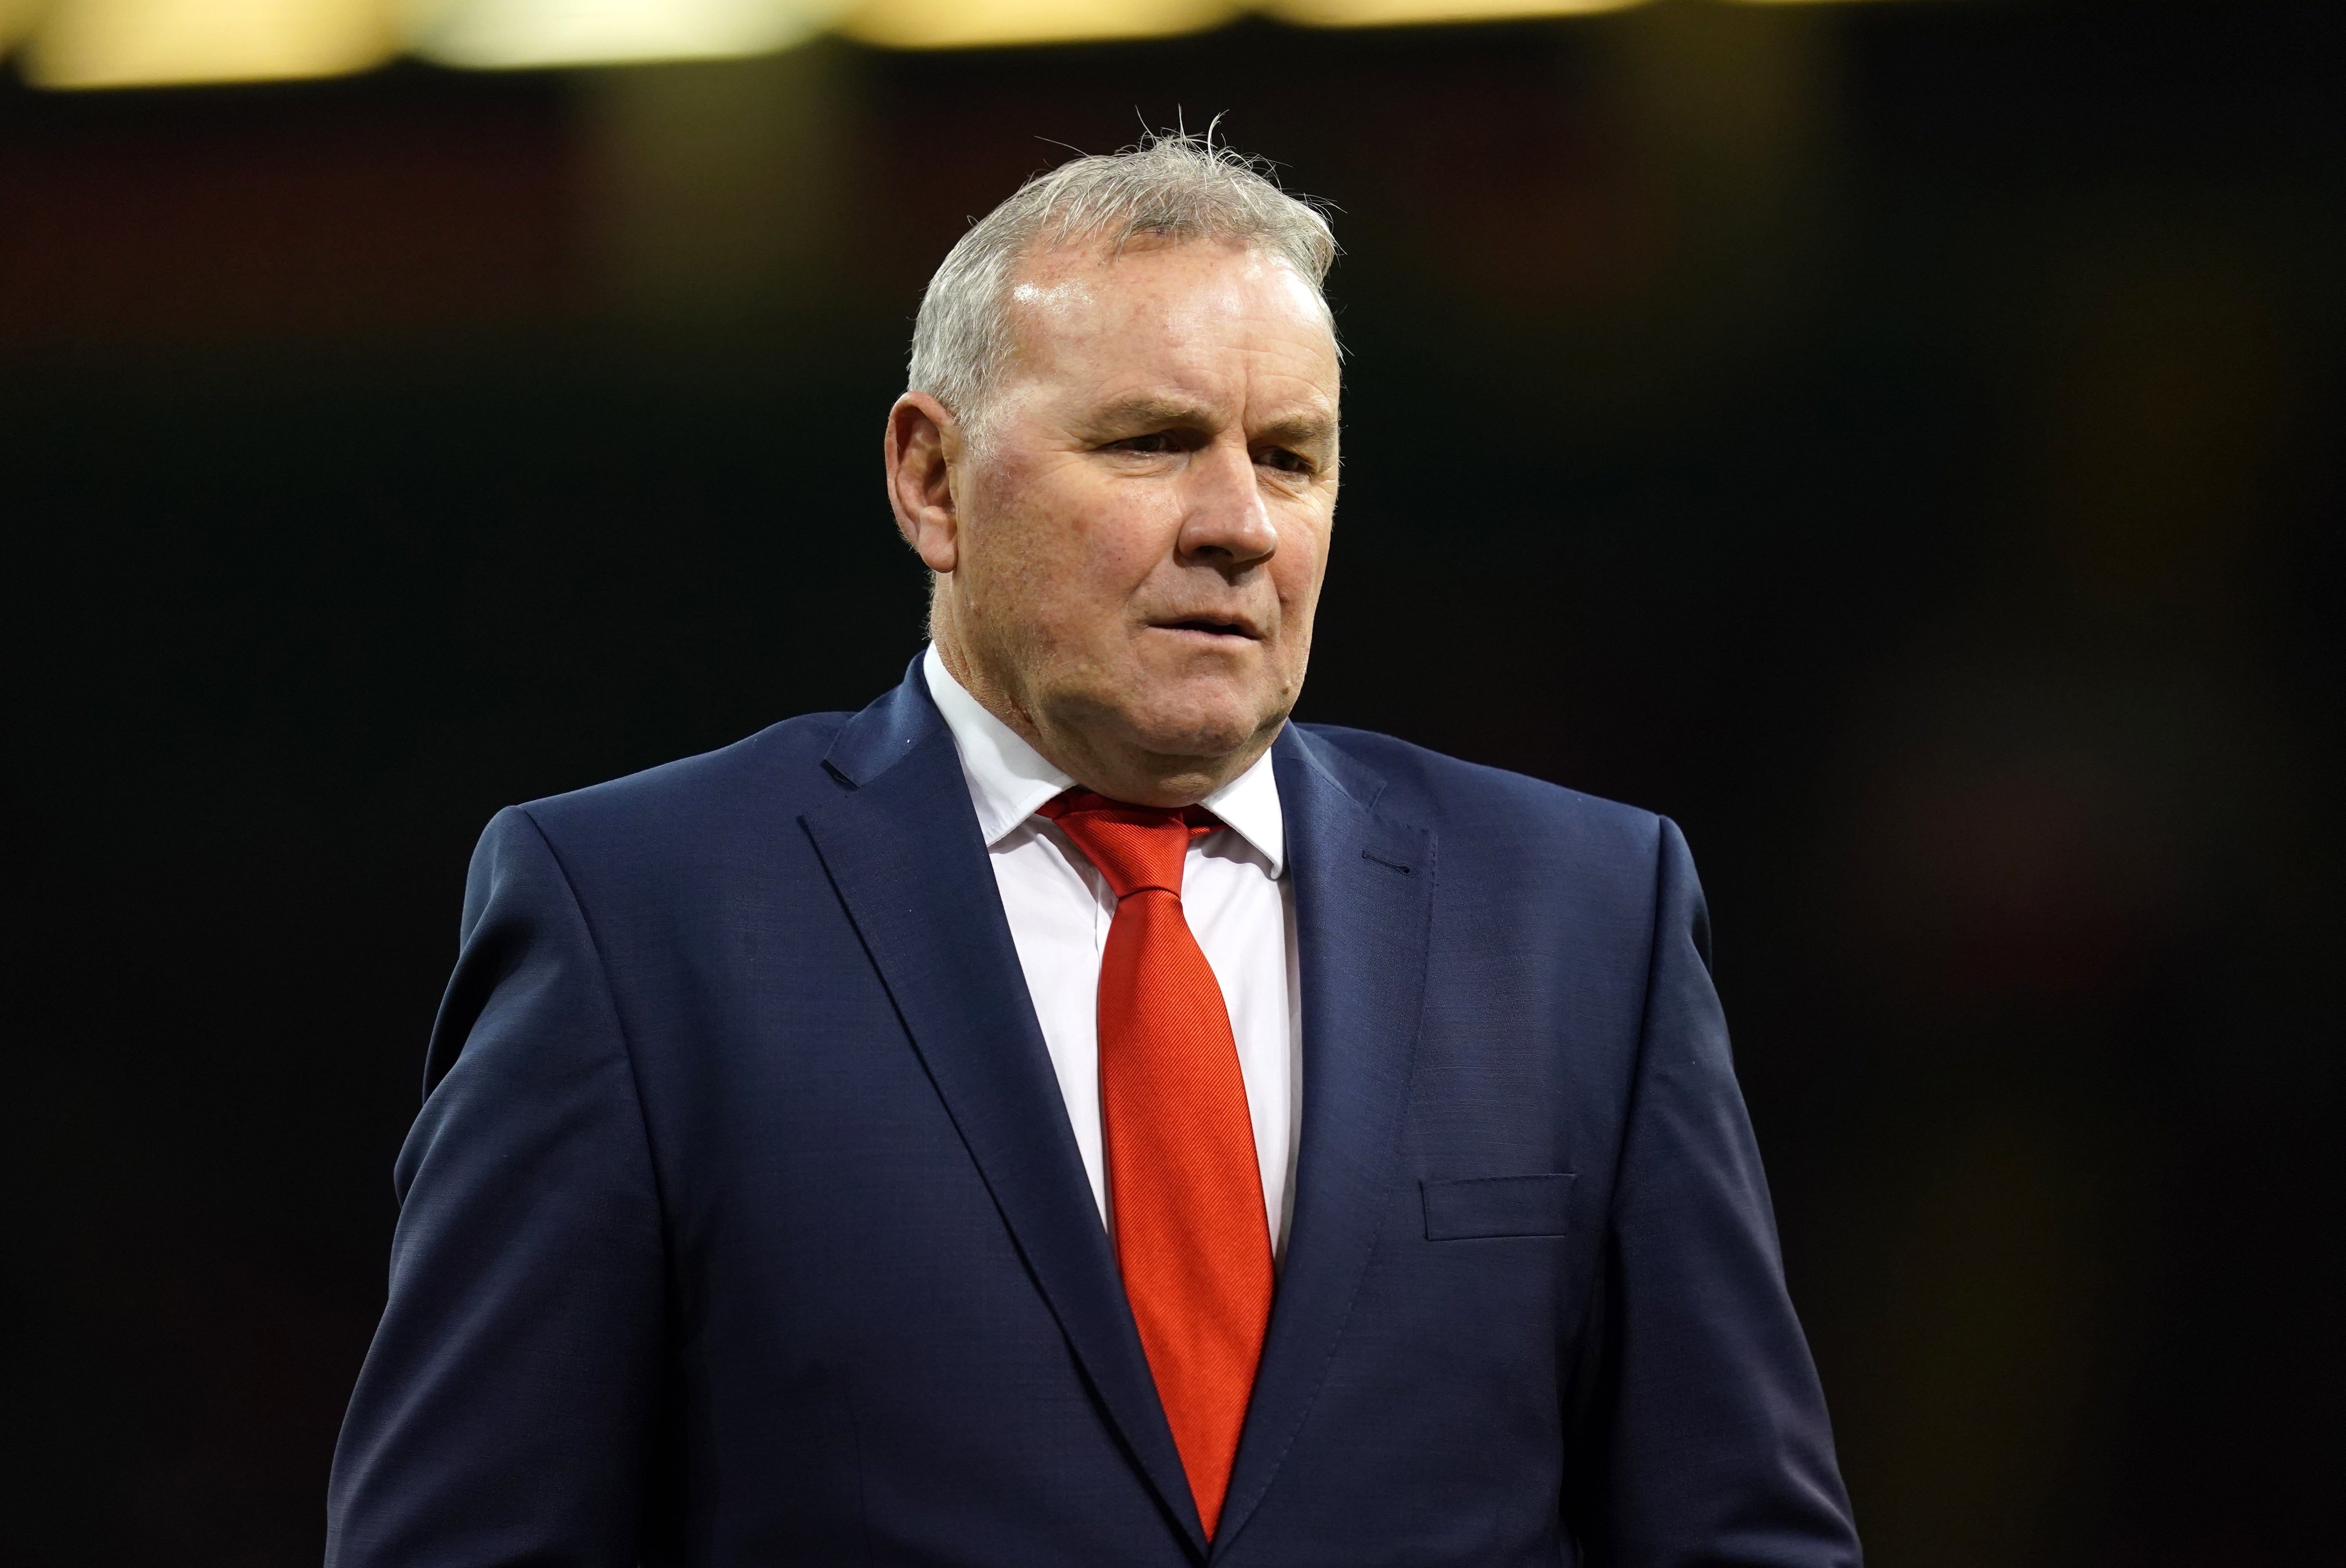 Wales head coach Wayne Pivac questioned the validity of Alex Dombrandt’s try